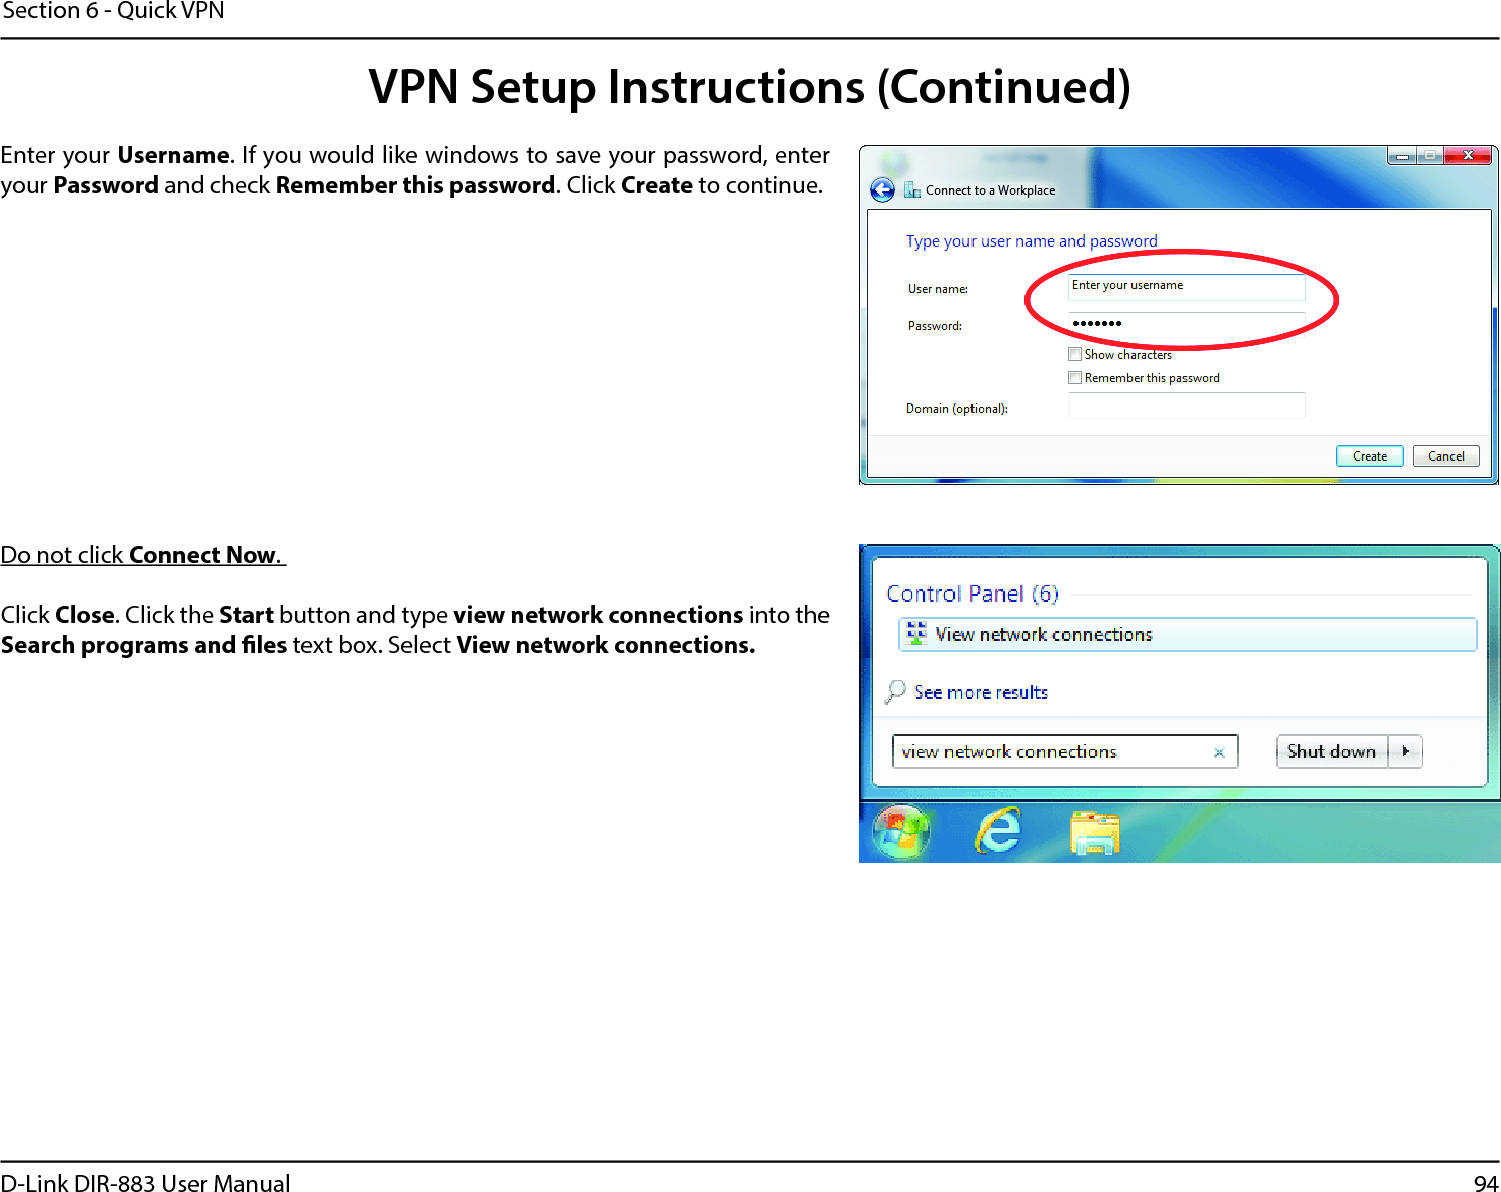 94D-Link DIR-883 User ManualSection 6 - Quick VPNEnter your Username. If you would like windows to save your password, enter your Password and check Remember this password. Click Create to continue.Do not click Connect Now.Click Close. Click the Start button and type view network connections into the Search programs and les text box. Select View network connections. VPN Setup Instructions (Continued)